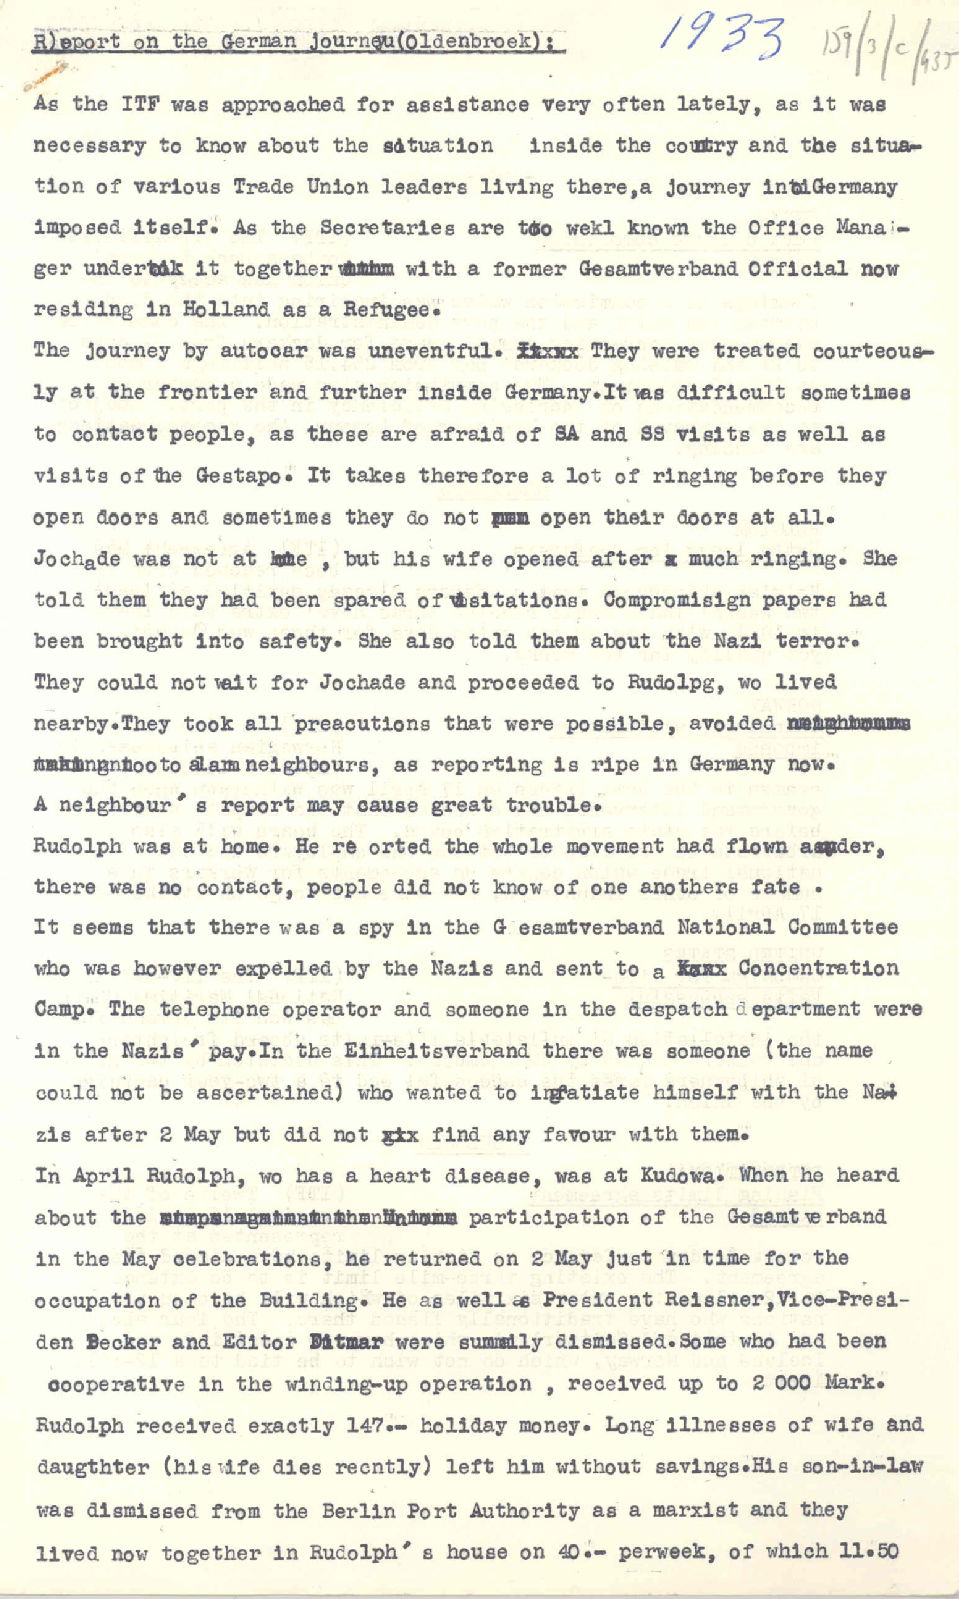 Report on the German journey, 1933